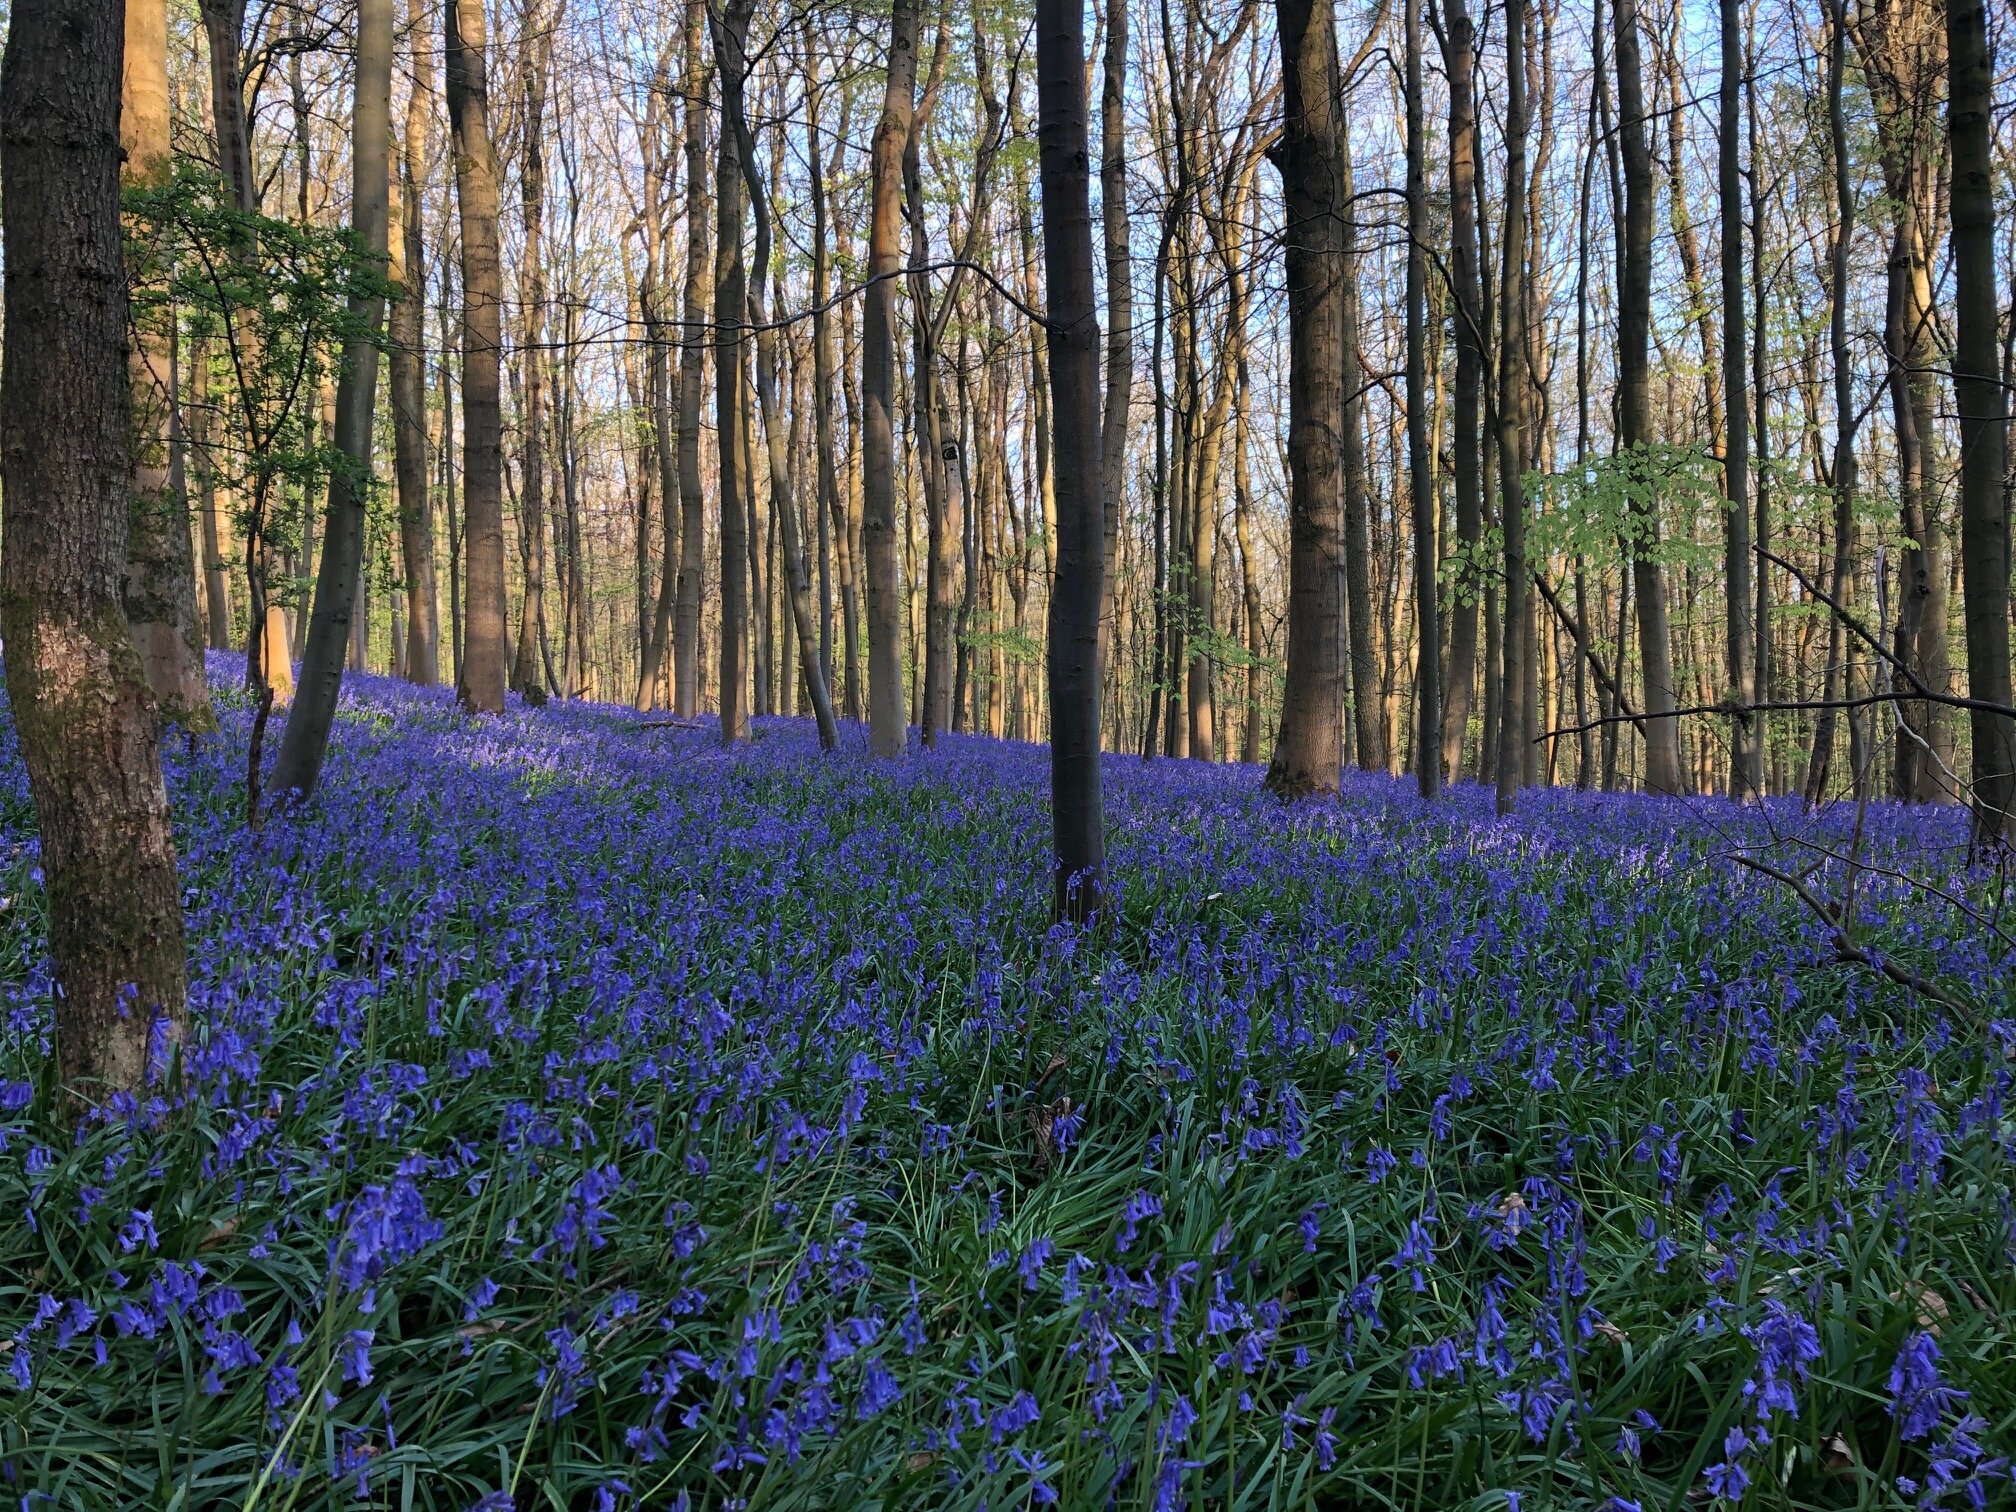 Bluebells In A Field With Trees